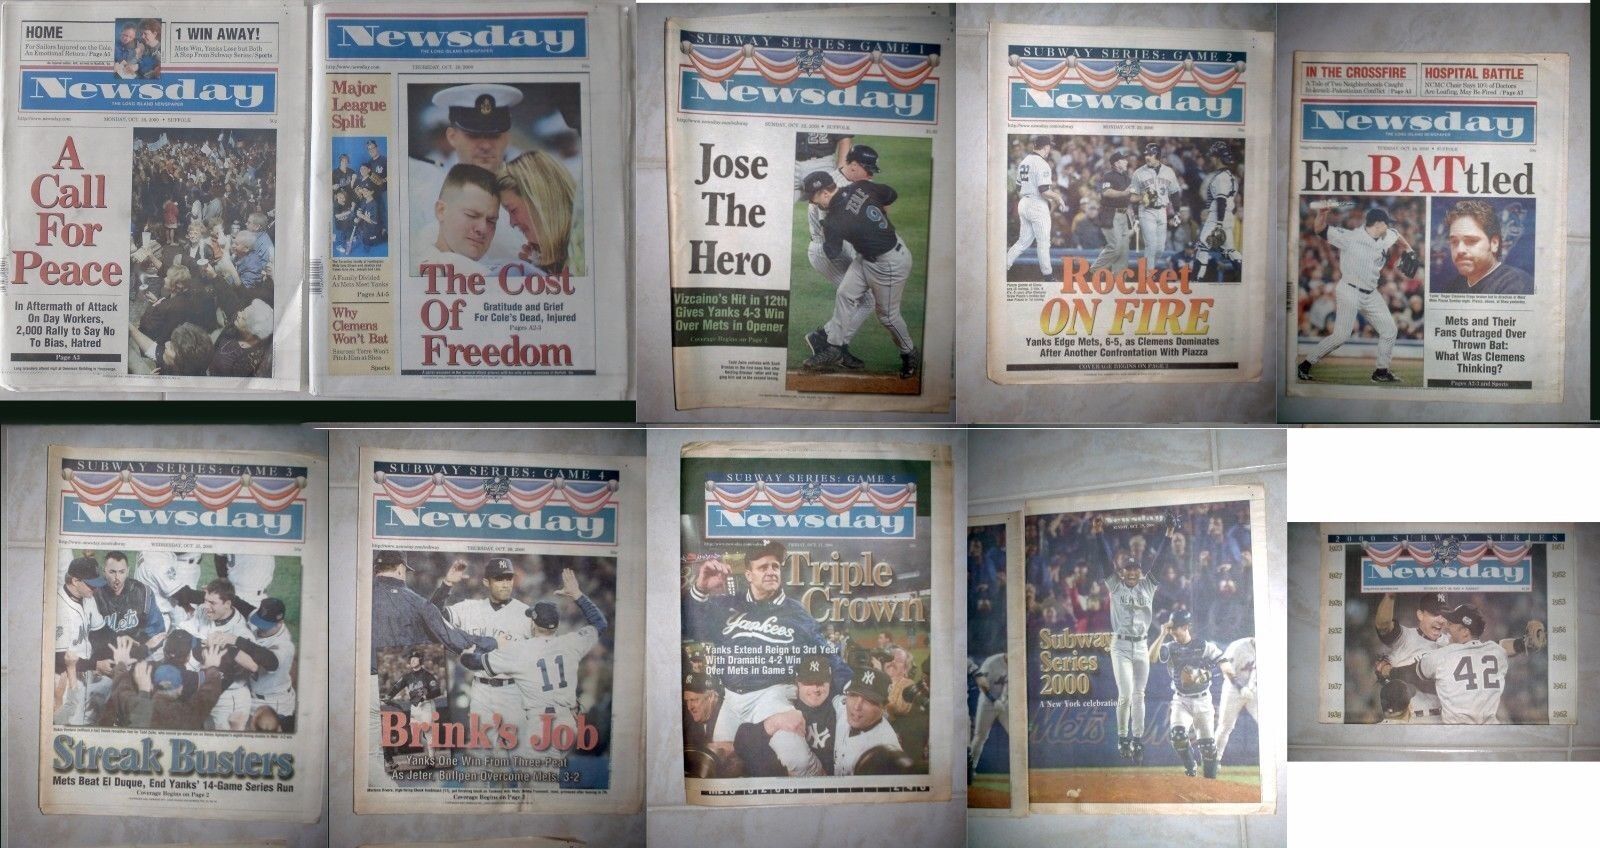 Subway Series Mets/Yankees Oct 2000 Commemorative Newspaper Collection-lot of 10